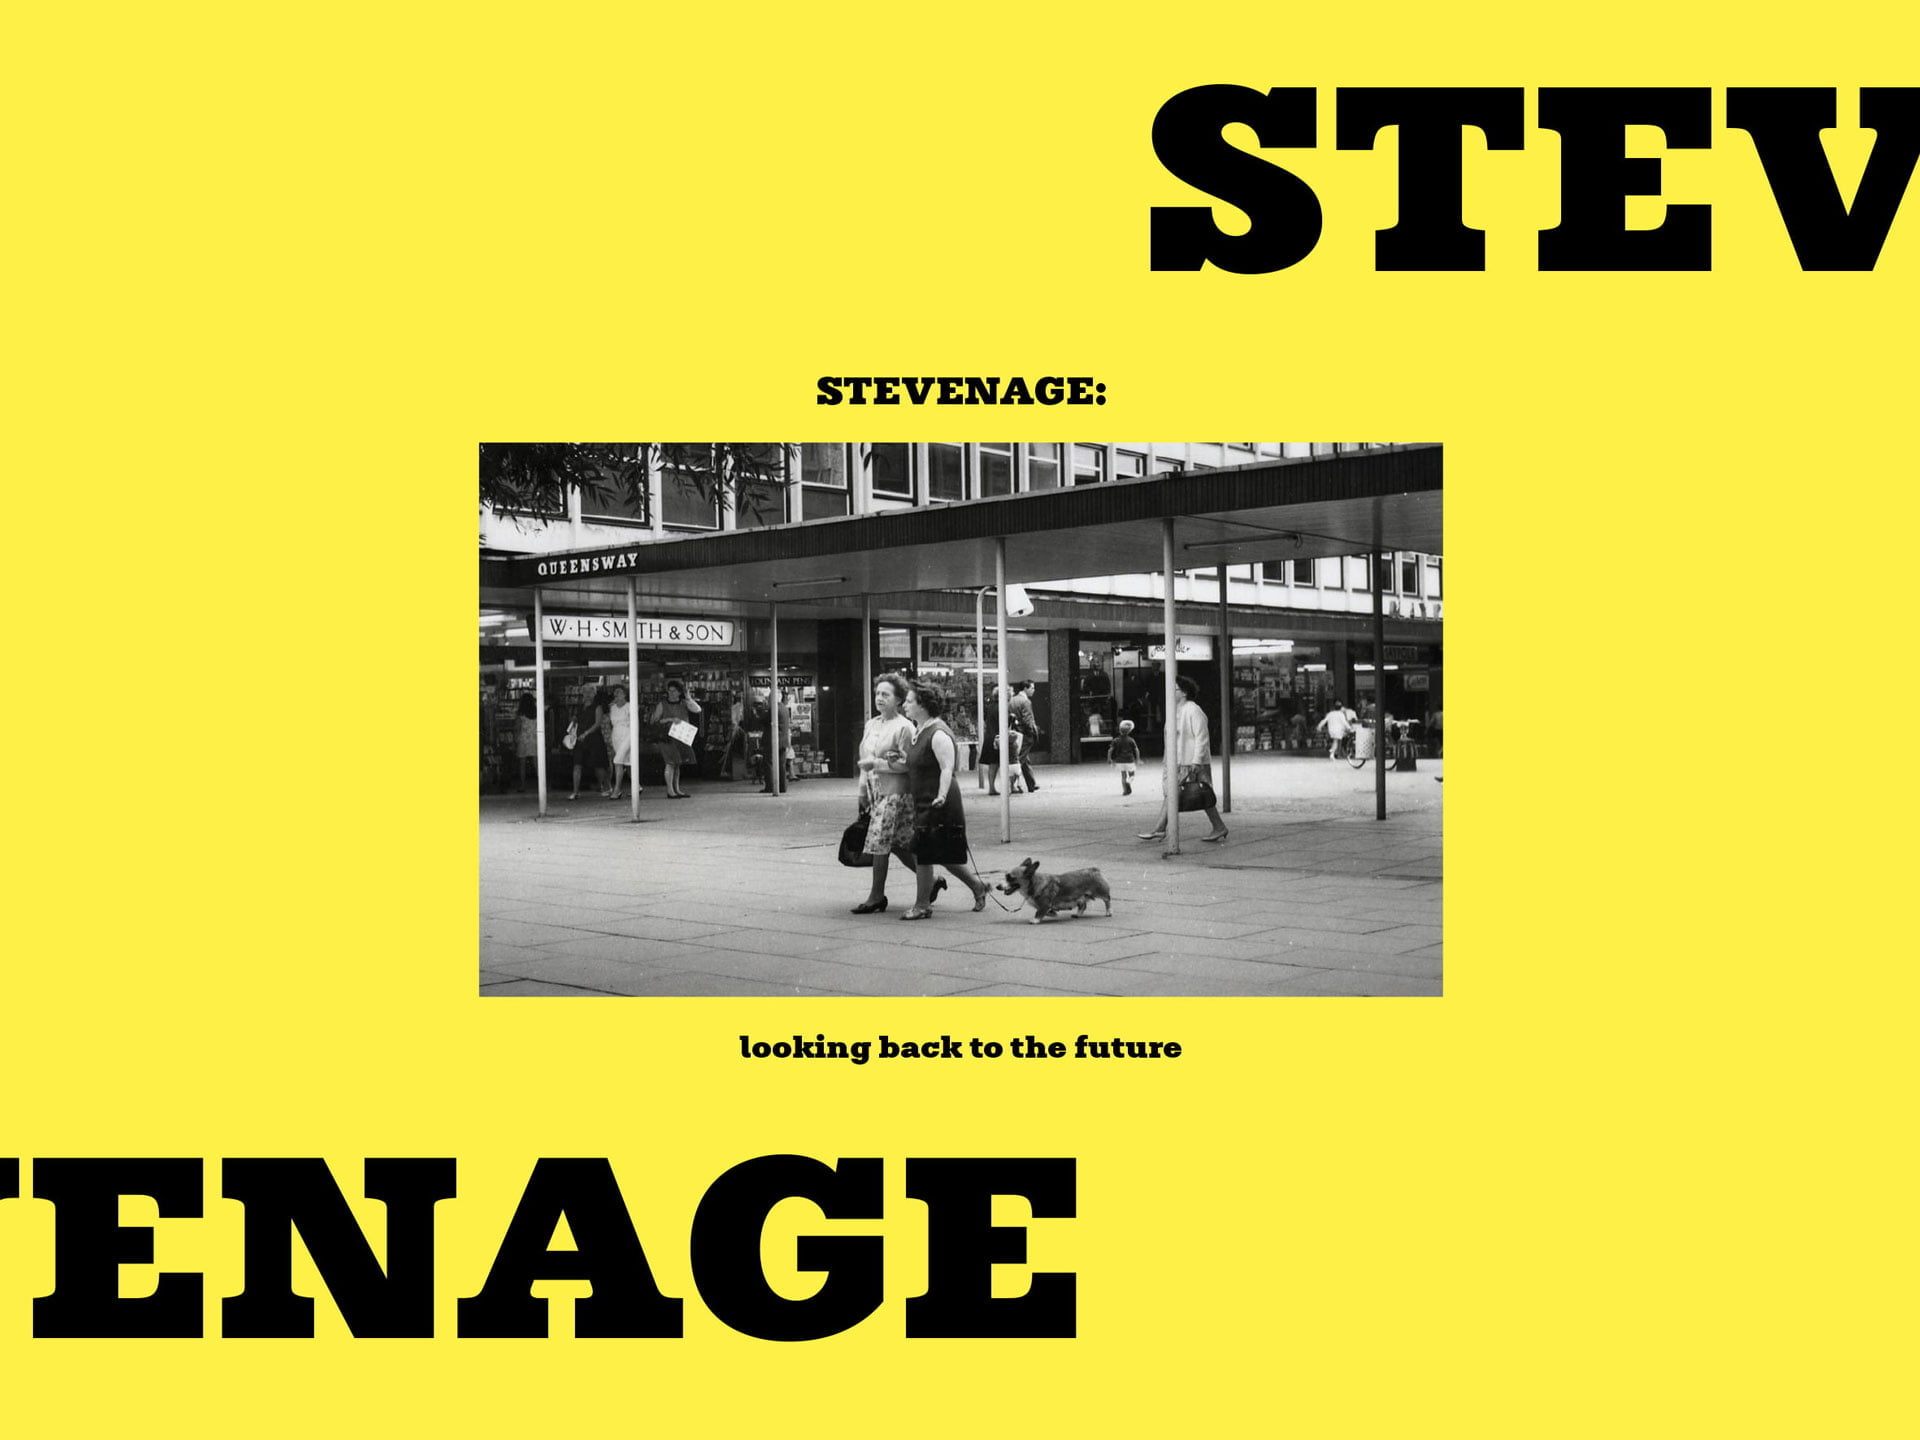 Stevenage: Looking back to the future